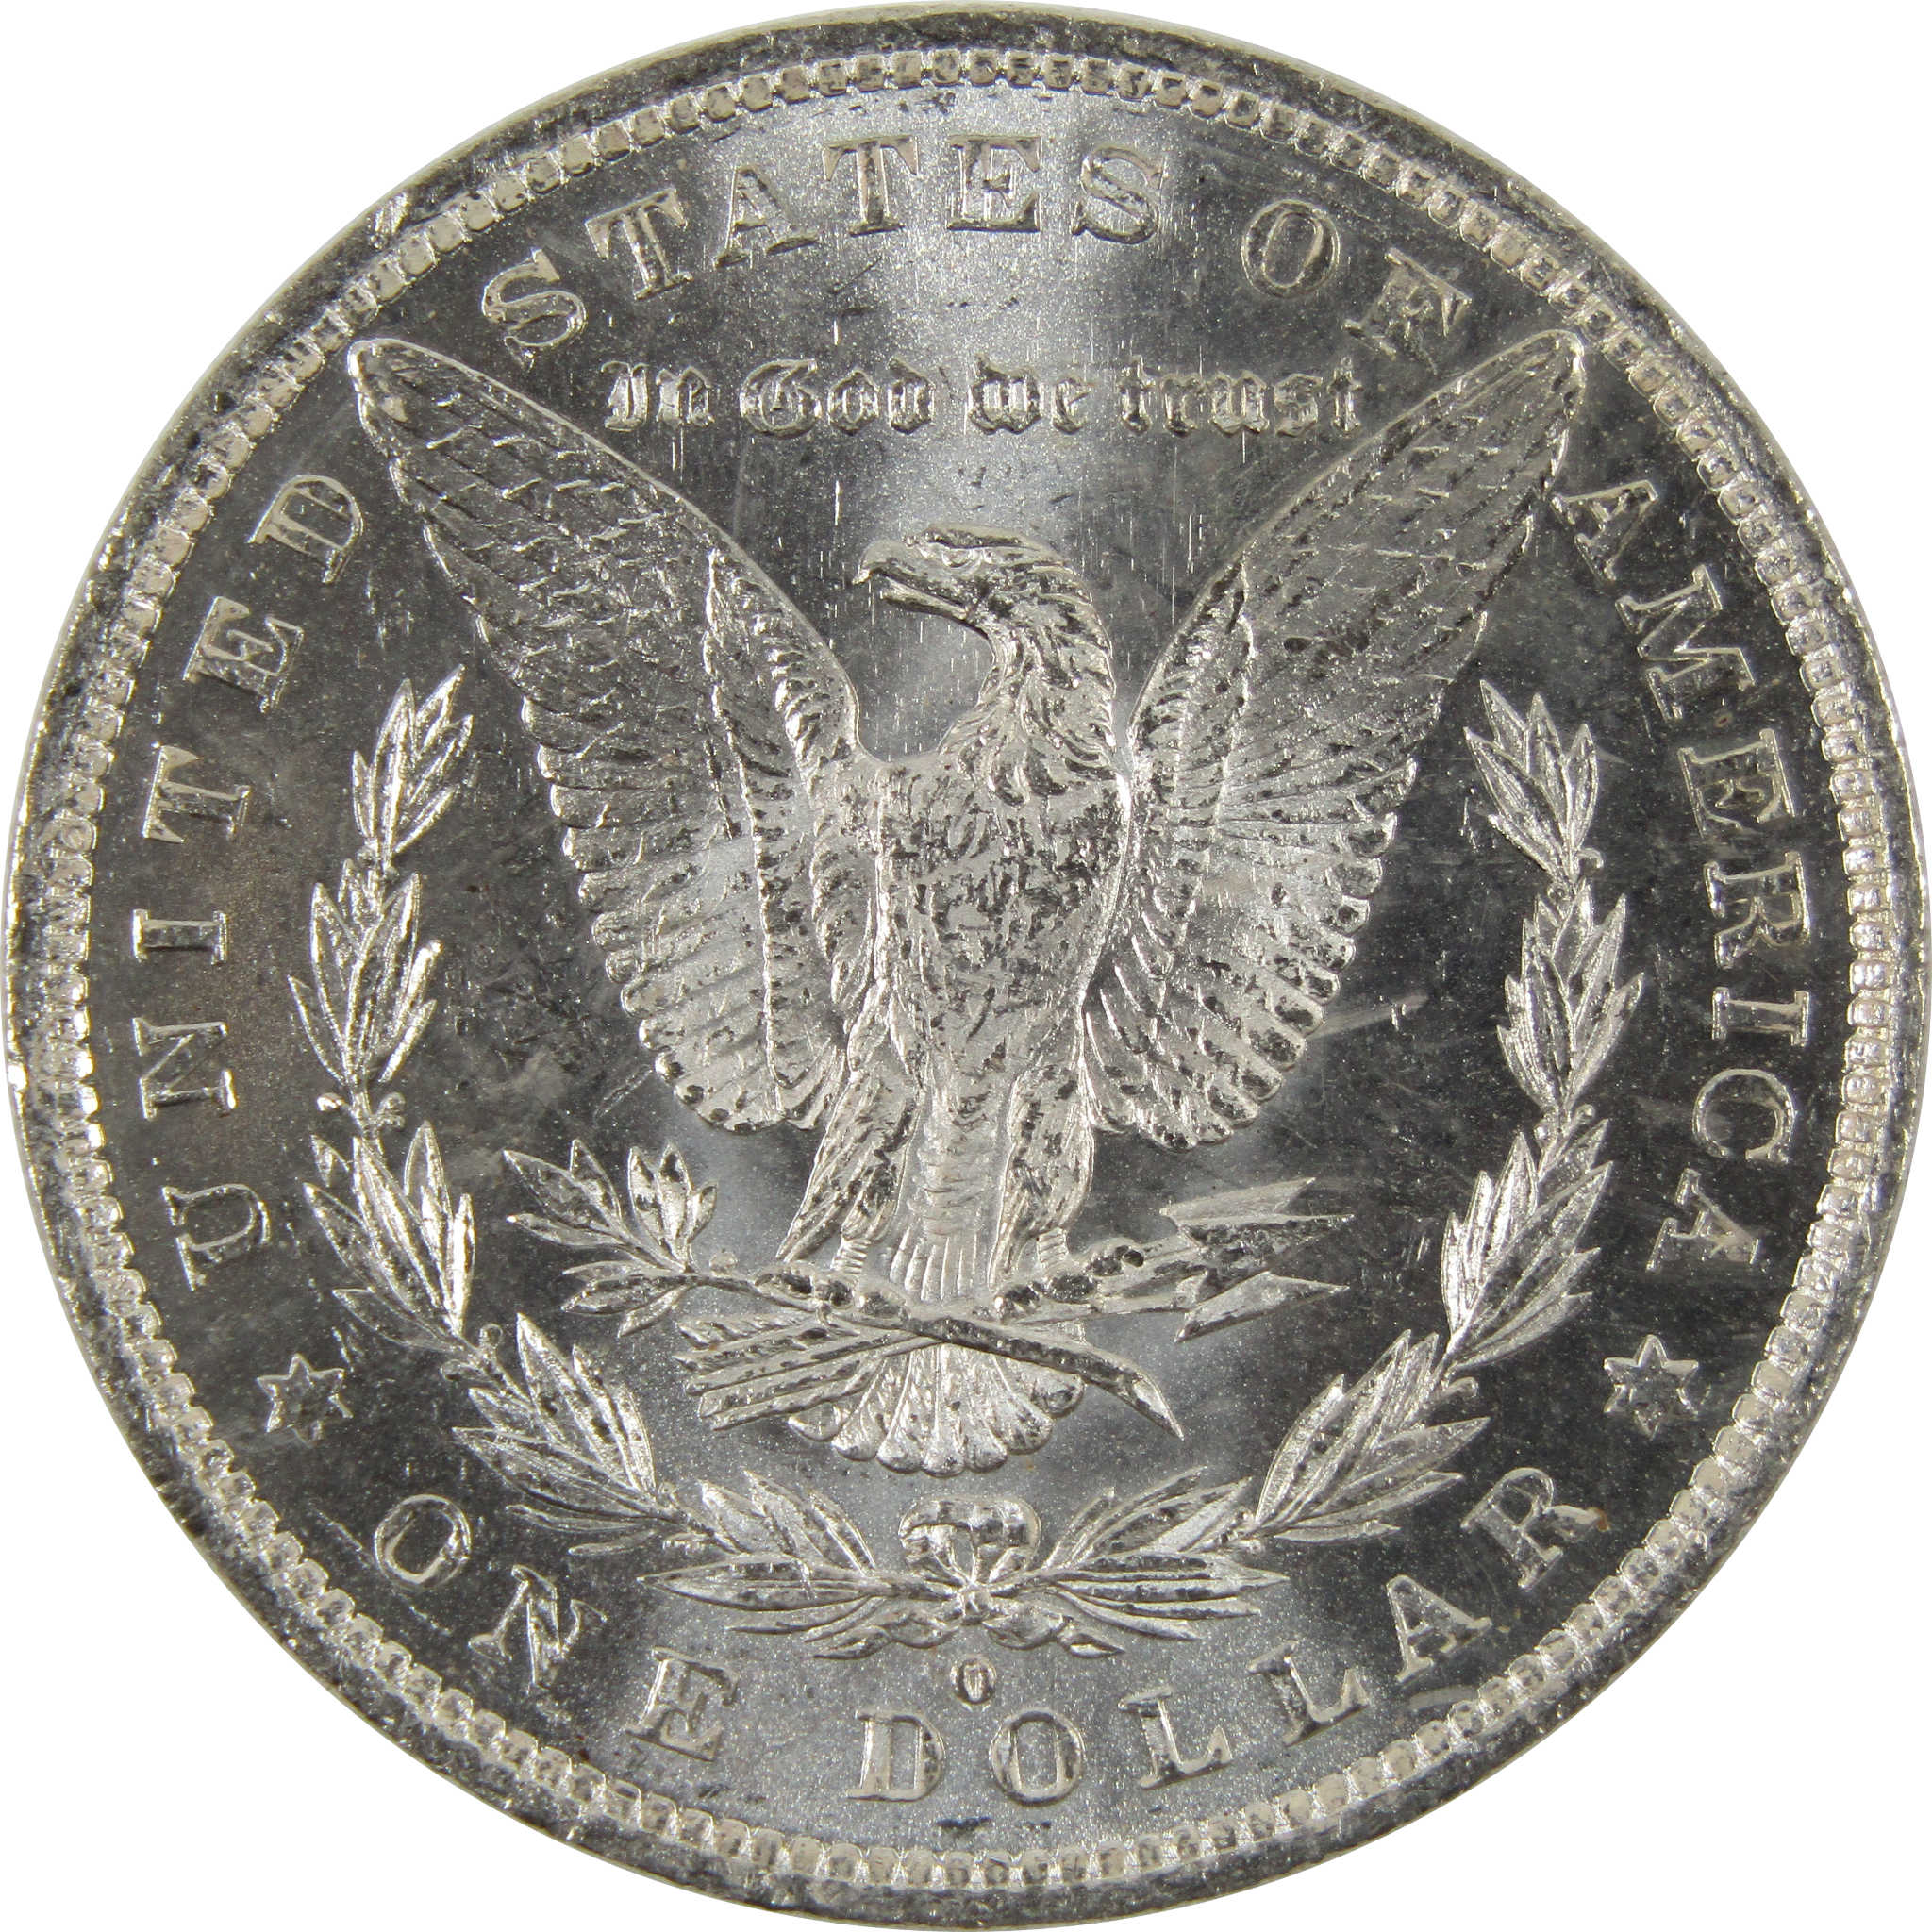 1882 O/O Morgan Dollar AU About Uncirculated 90% Silver $1 SKU:I8887 - Morgan coin - Morgan silver dollar - Morgan silver dollar for sale - Profile Coins &amp; Collectibles